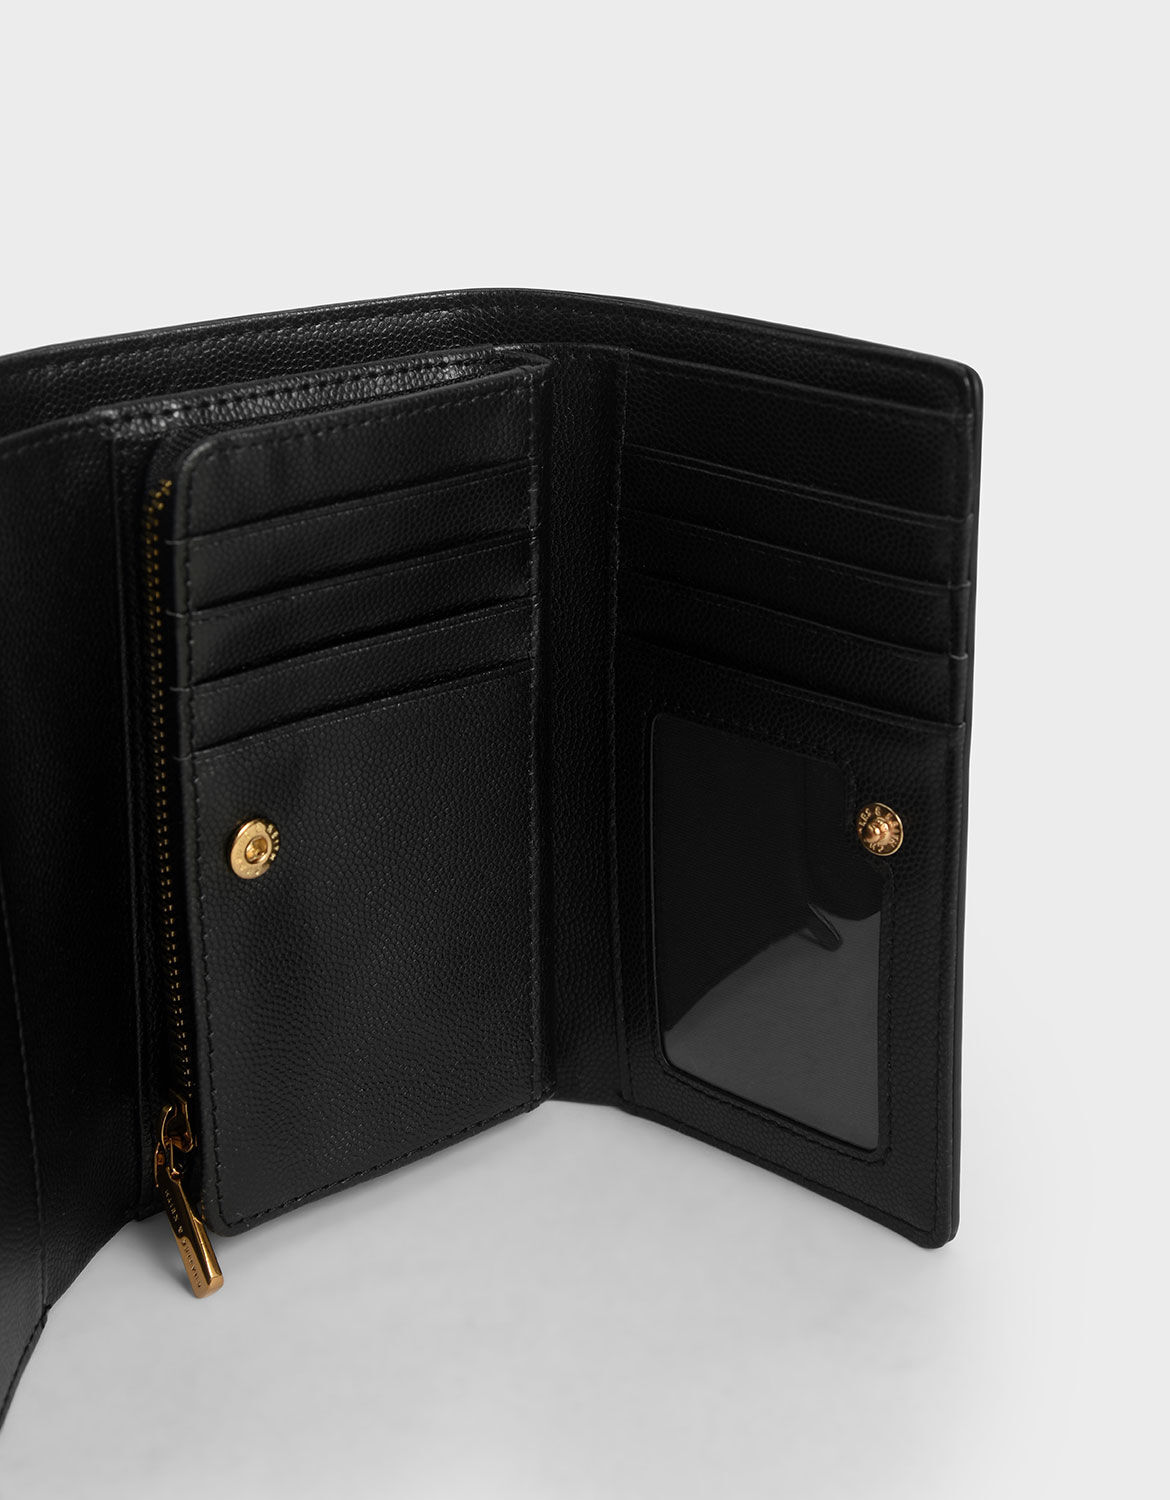 Black Metallic Accent Short Wallet | CHARLES & KEITH